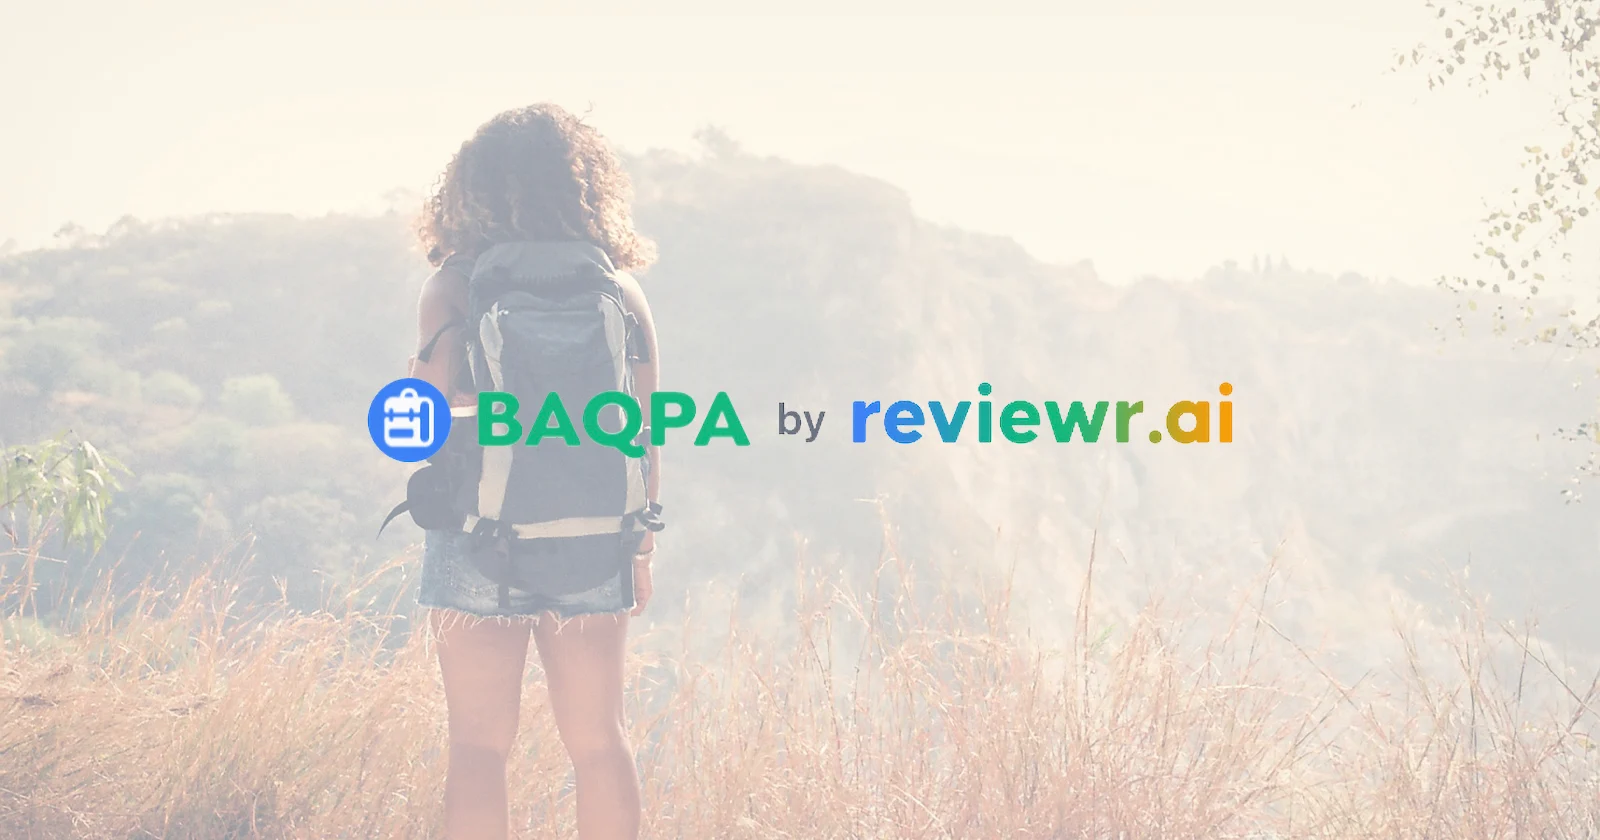 BAQPA Aggregates Backpack Recommendations From 10K+ Sources